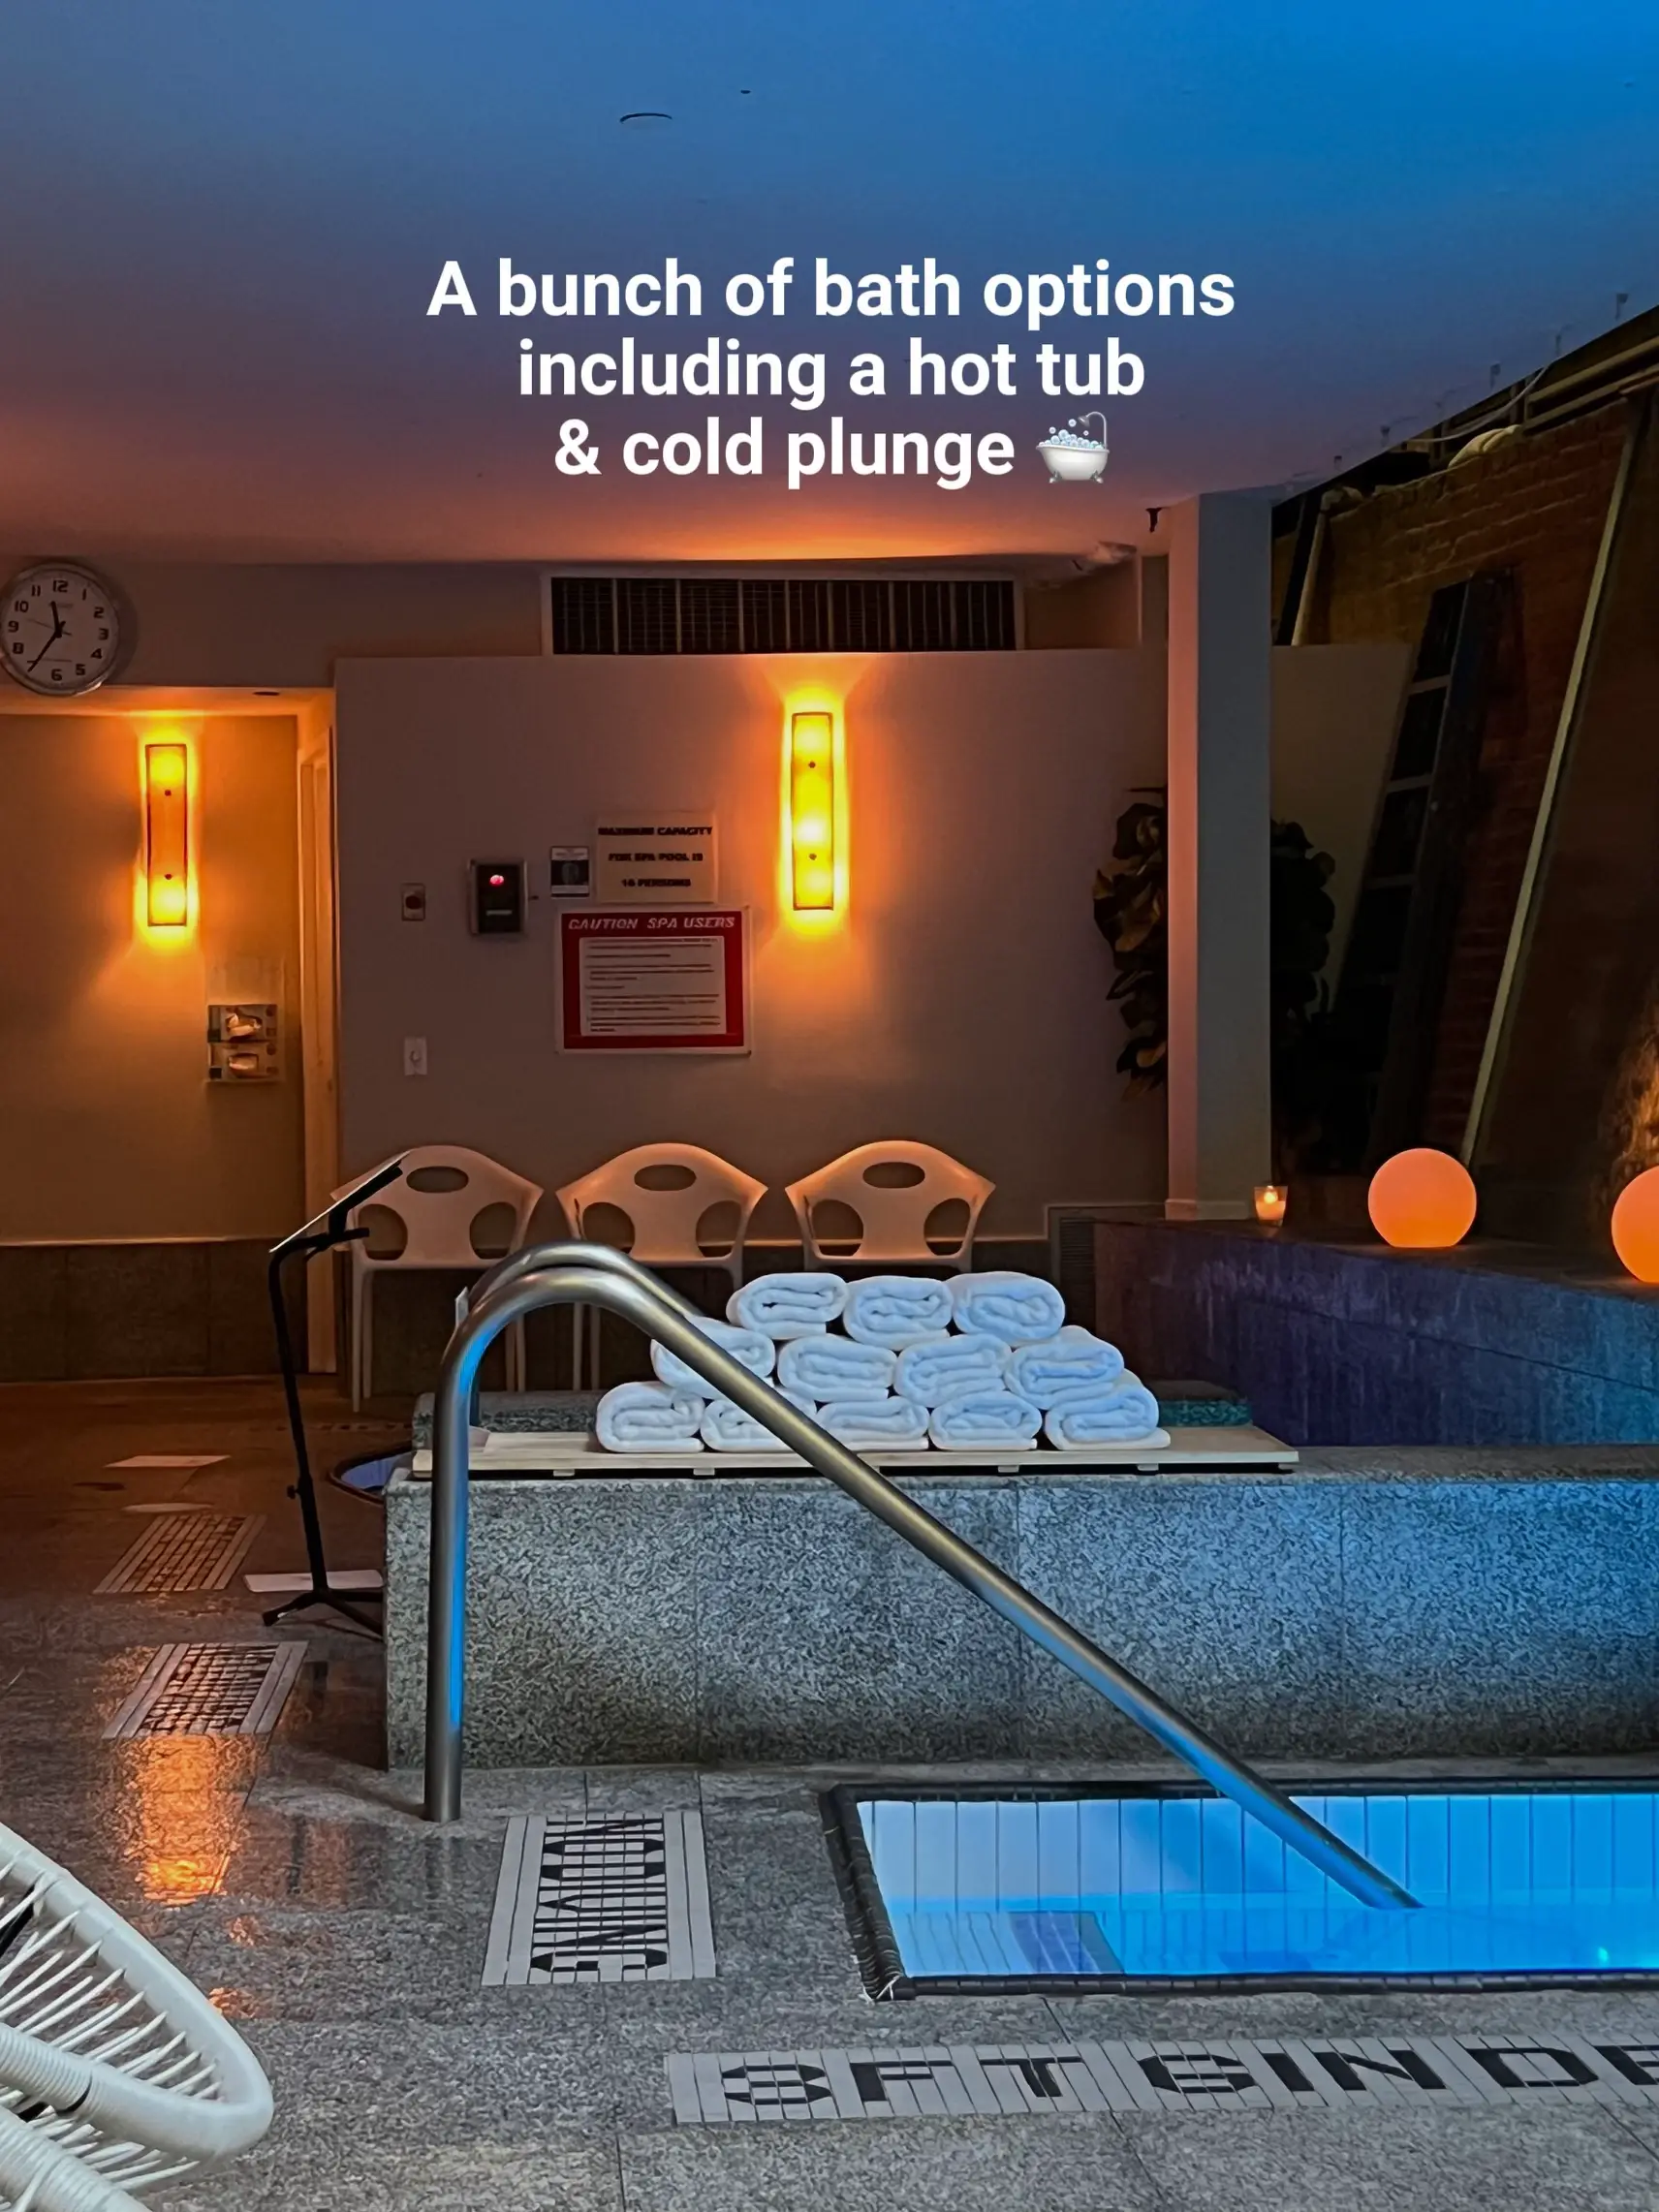  A hotel room with a hot tub and a cold plunge.